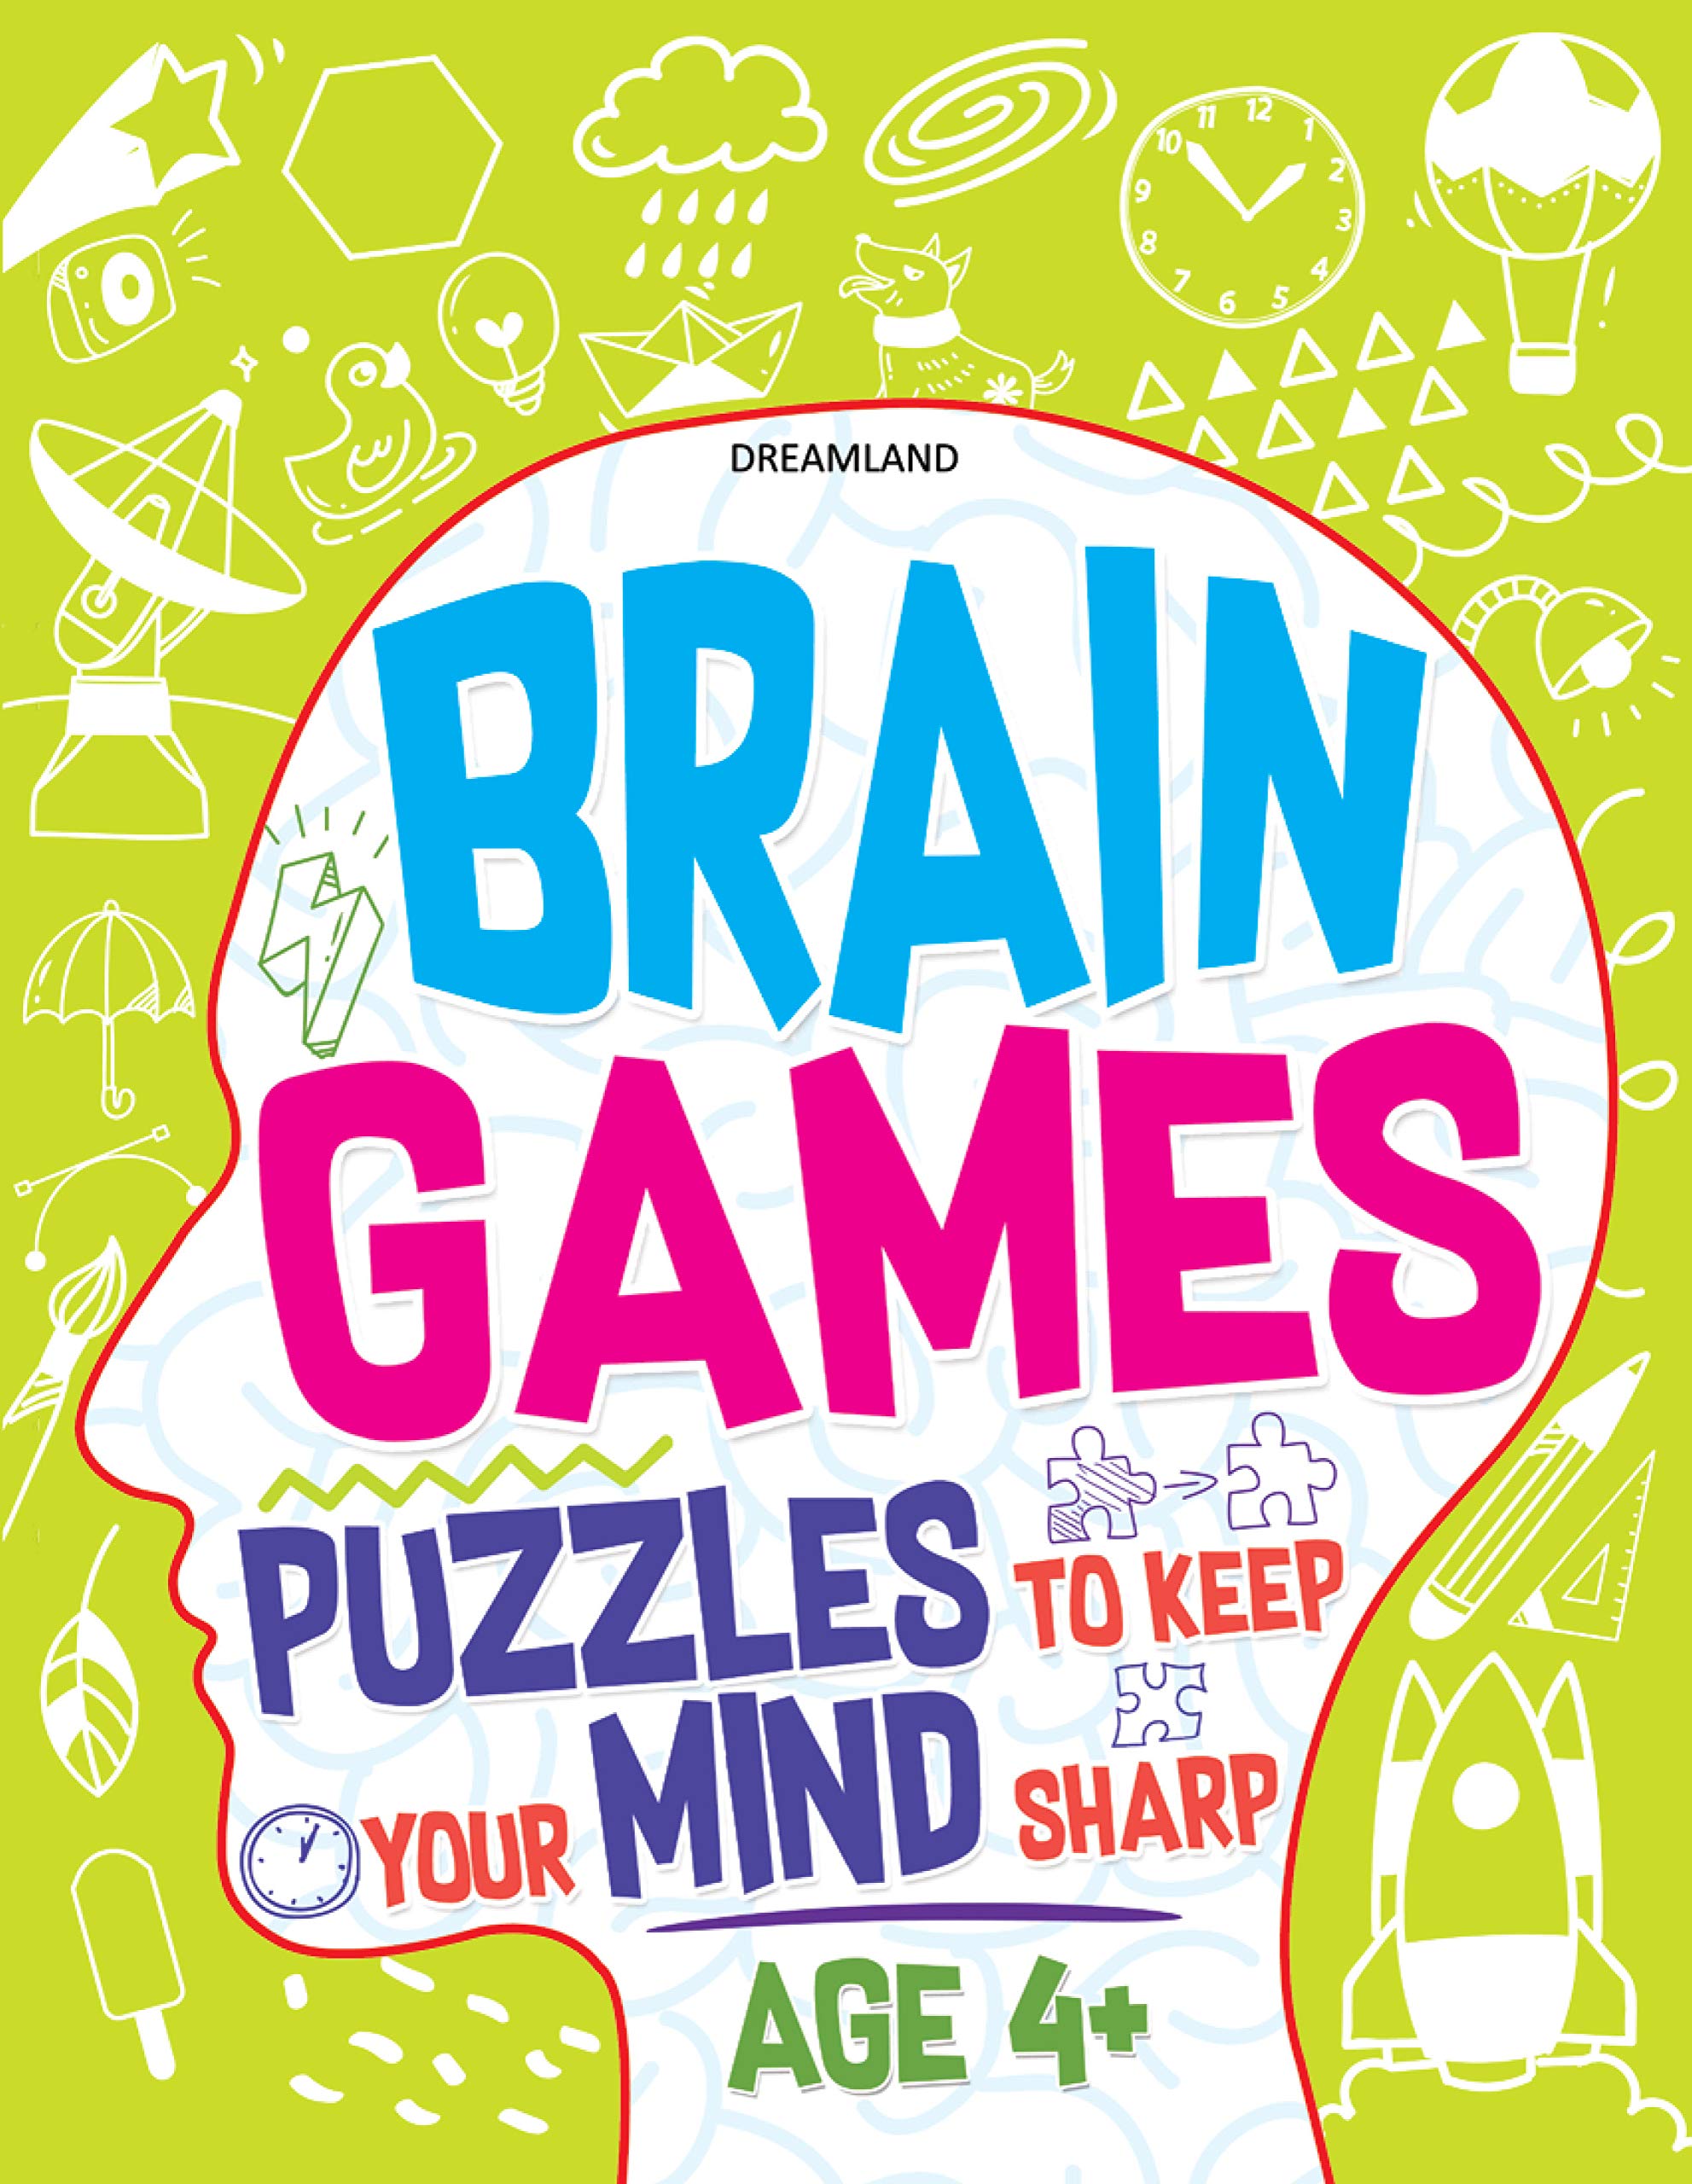 Brain Games Puzzles To Keep Your Mind Sharp Age 4+